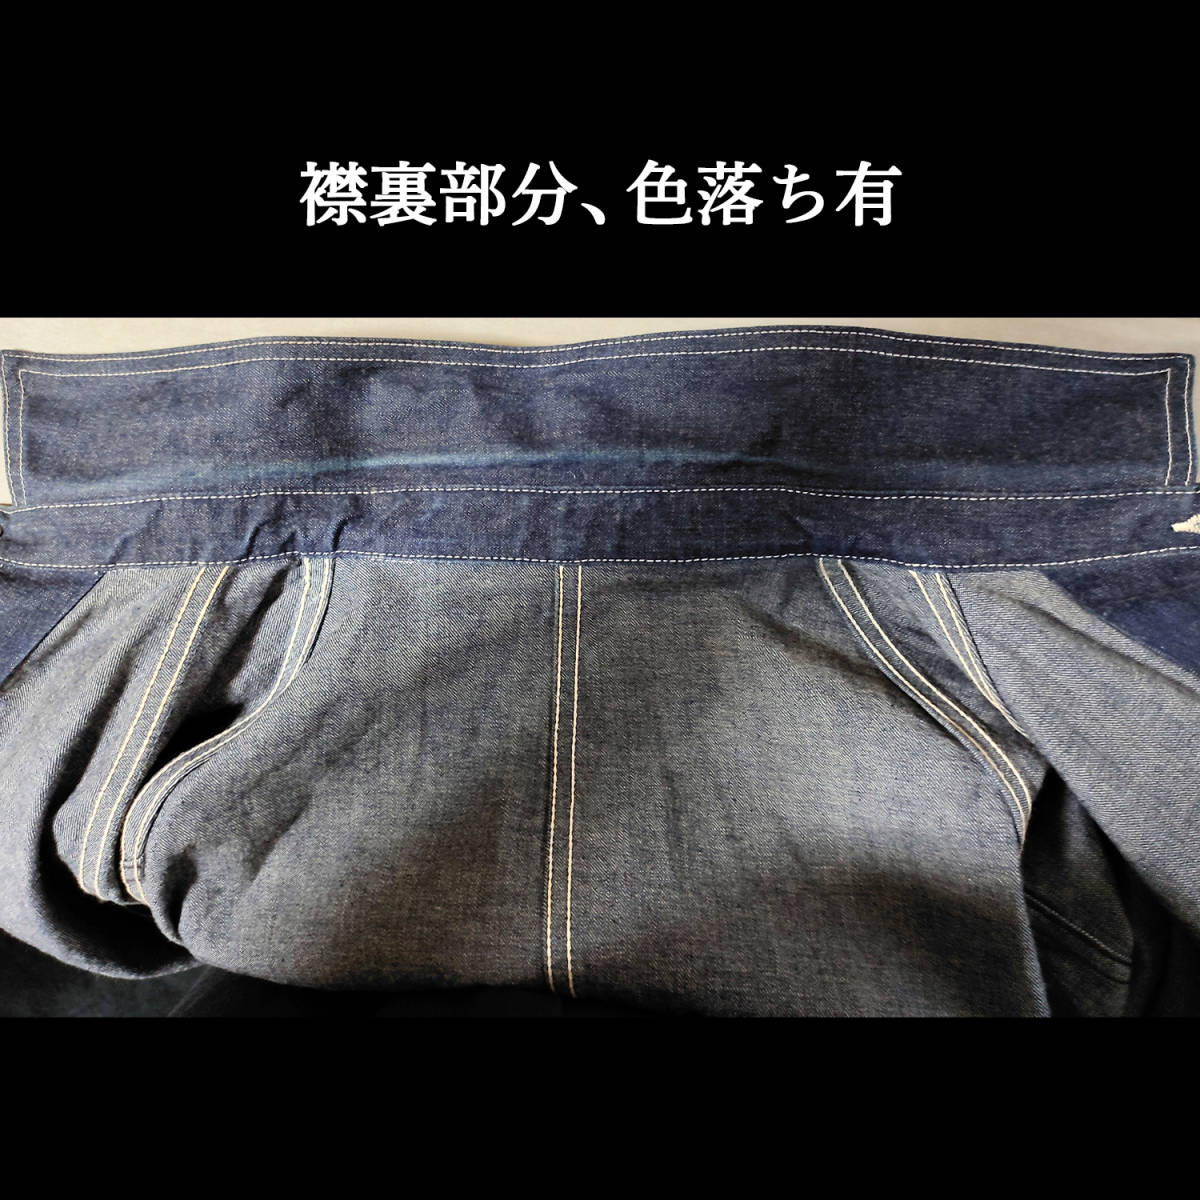 AtLastCo. アットラスト デニムカバーオール 677J 42 BUTCHER PRODUCTS TIMEWORN CLOTHING  product details Proxy bidding and ordering service for auctions and  shopping within Japan and the United States Get the latest news